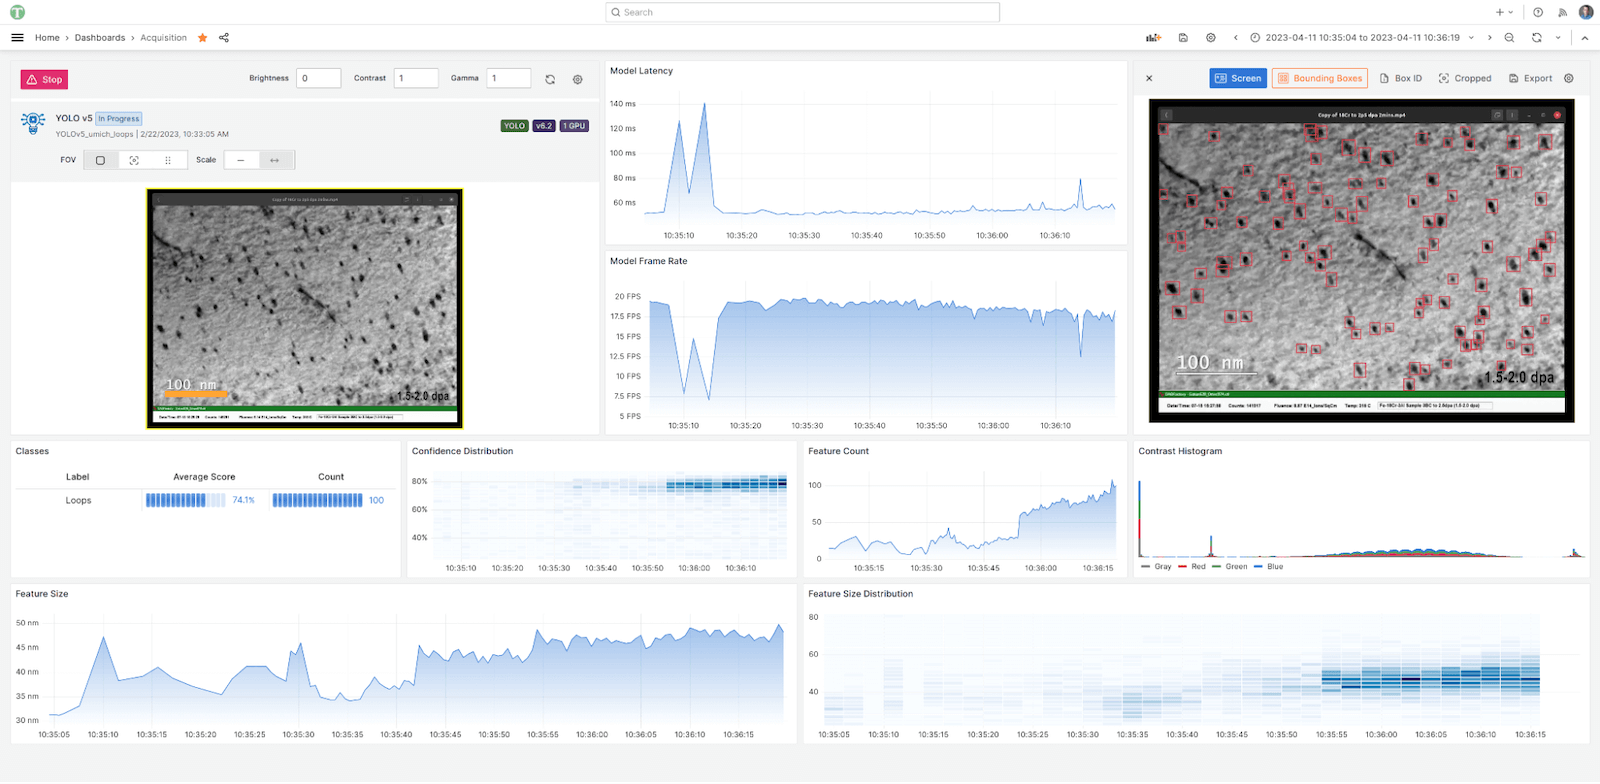 A Grafana dashboard with panels showing scientific images and data graphs.